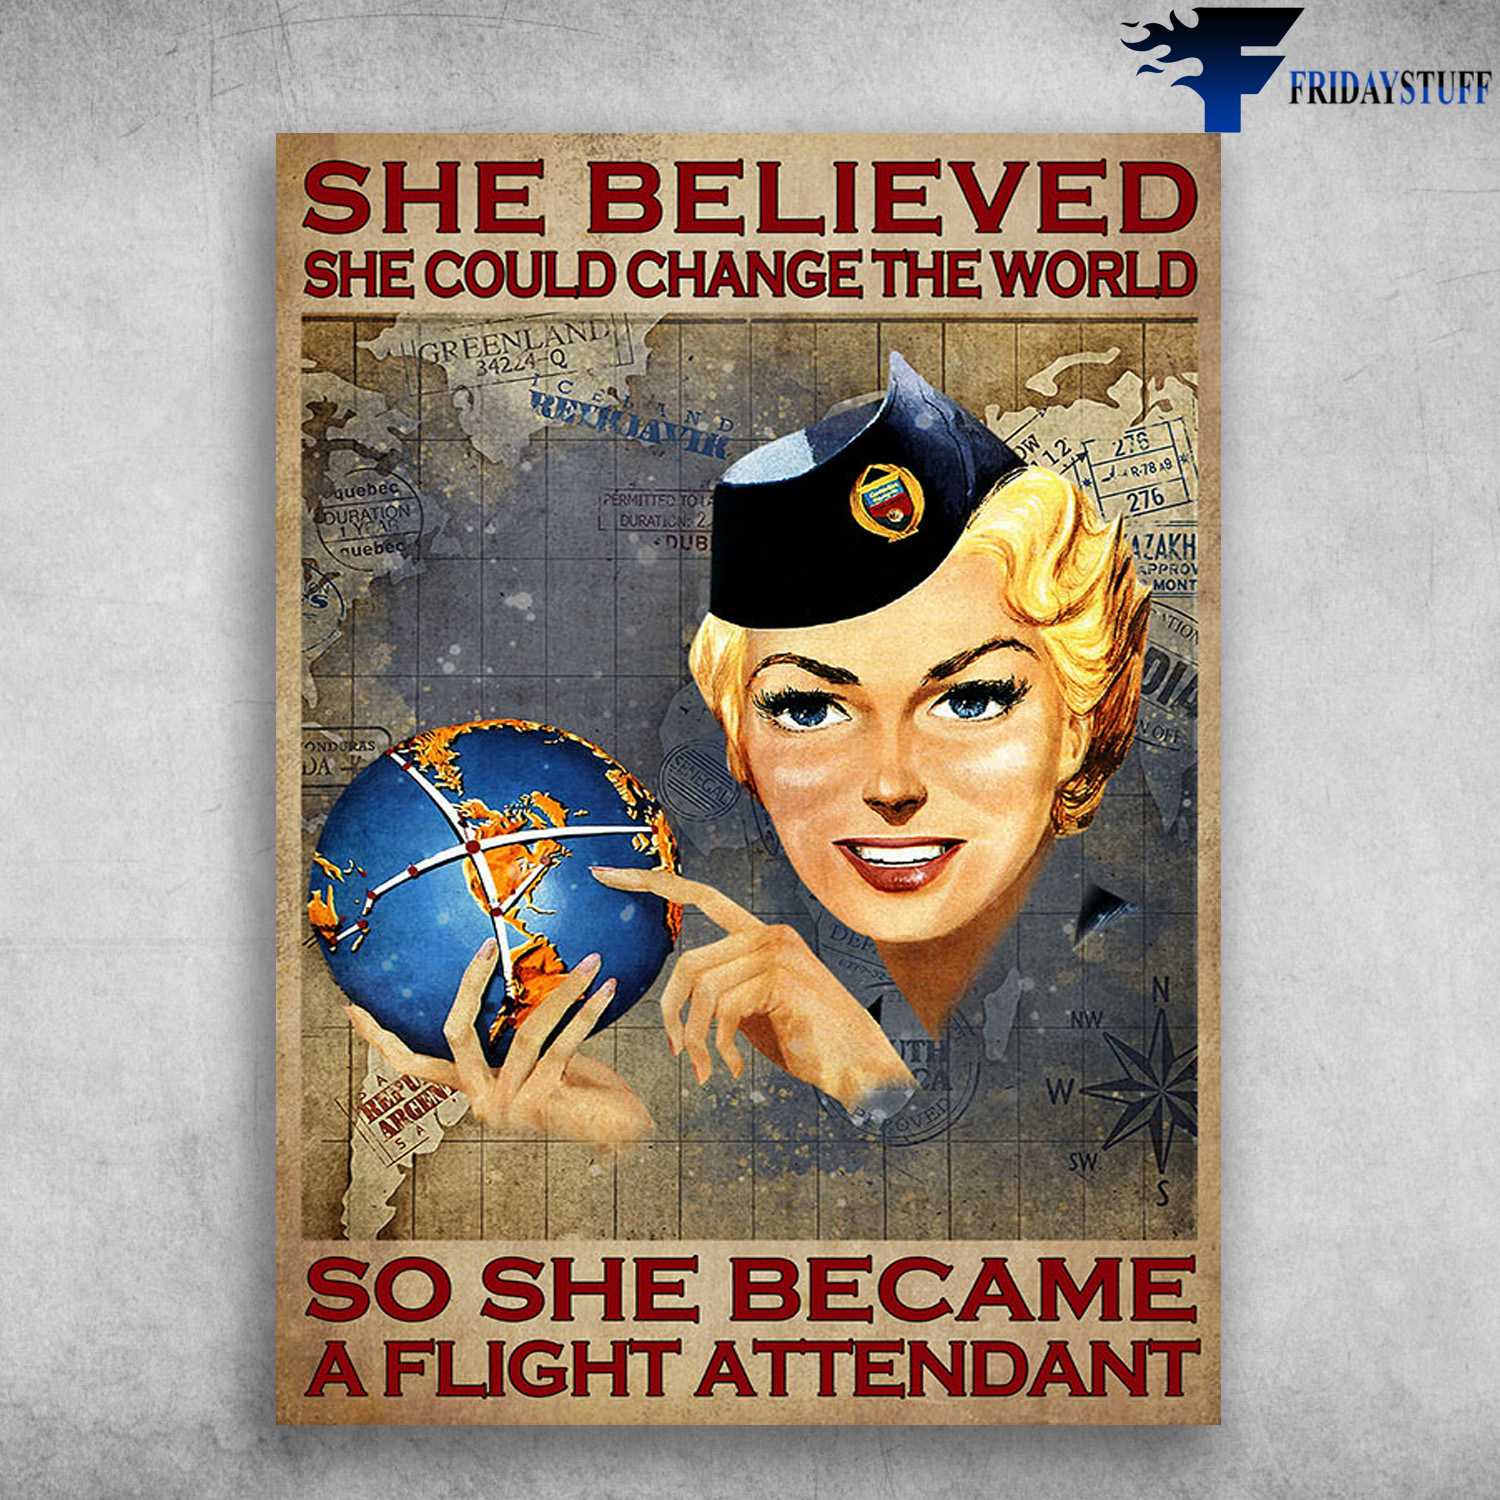 Flight Attendant - She Believed, She Could Change The World, So She Became A Flight Attendant